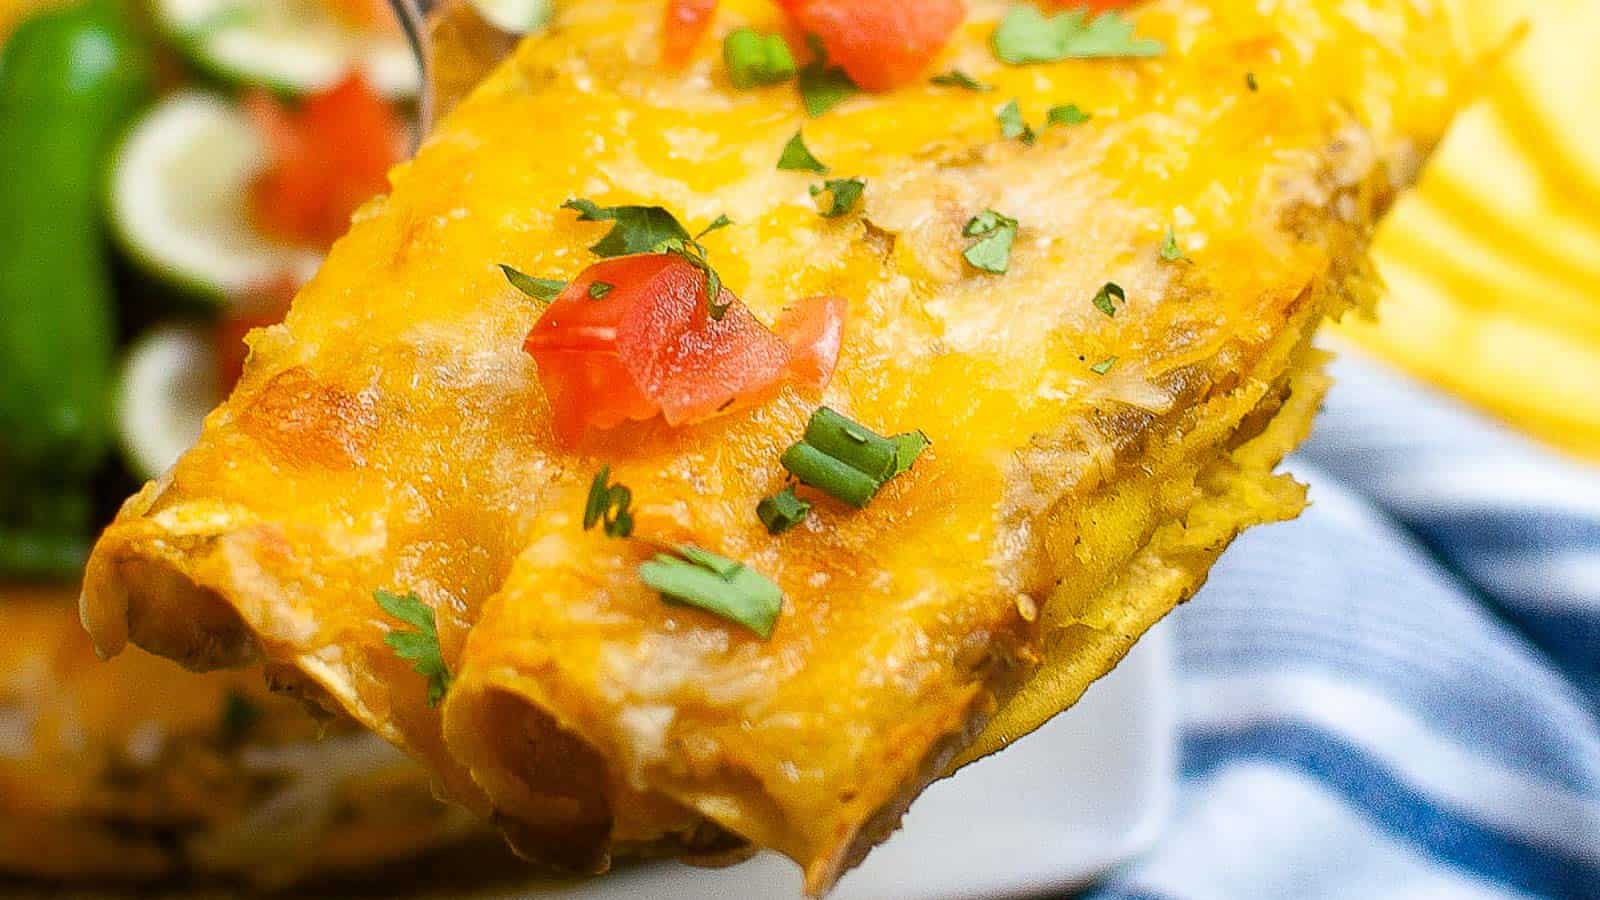 <p>Utilizing a kitchen gadget favorite, the air fryer, this meal brought new life to classic enchiladas. The irresistible crunch paired with the familiar, comforting filling ensures an empty dish every time. Air Fryer Chicken Enchiladas is a guaranteed win for busy weeknights, offering both convenience and flavor. Don’t be surprised when friends ask for tips on re-creating this standout dish at your next potluck.<br><strong>Get the Recipe: </strong><a href="https://allwaysdelicious.com/air-fryer-chicken-enchiladas/?utm_source=msn&utm_medium=page&utm_campaign=">Air Fryer Chicken Enchiladas</a></p>